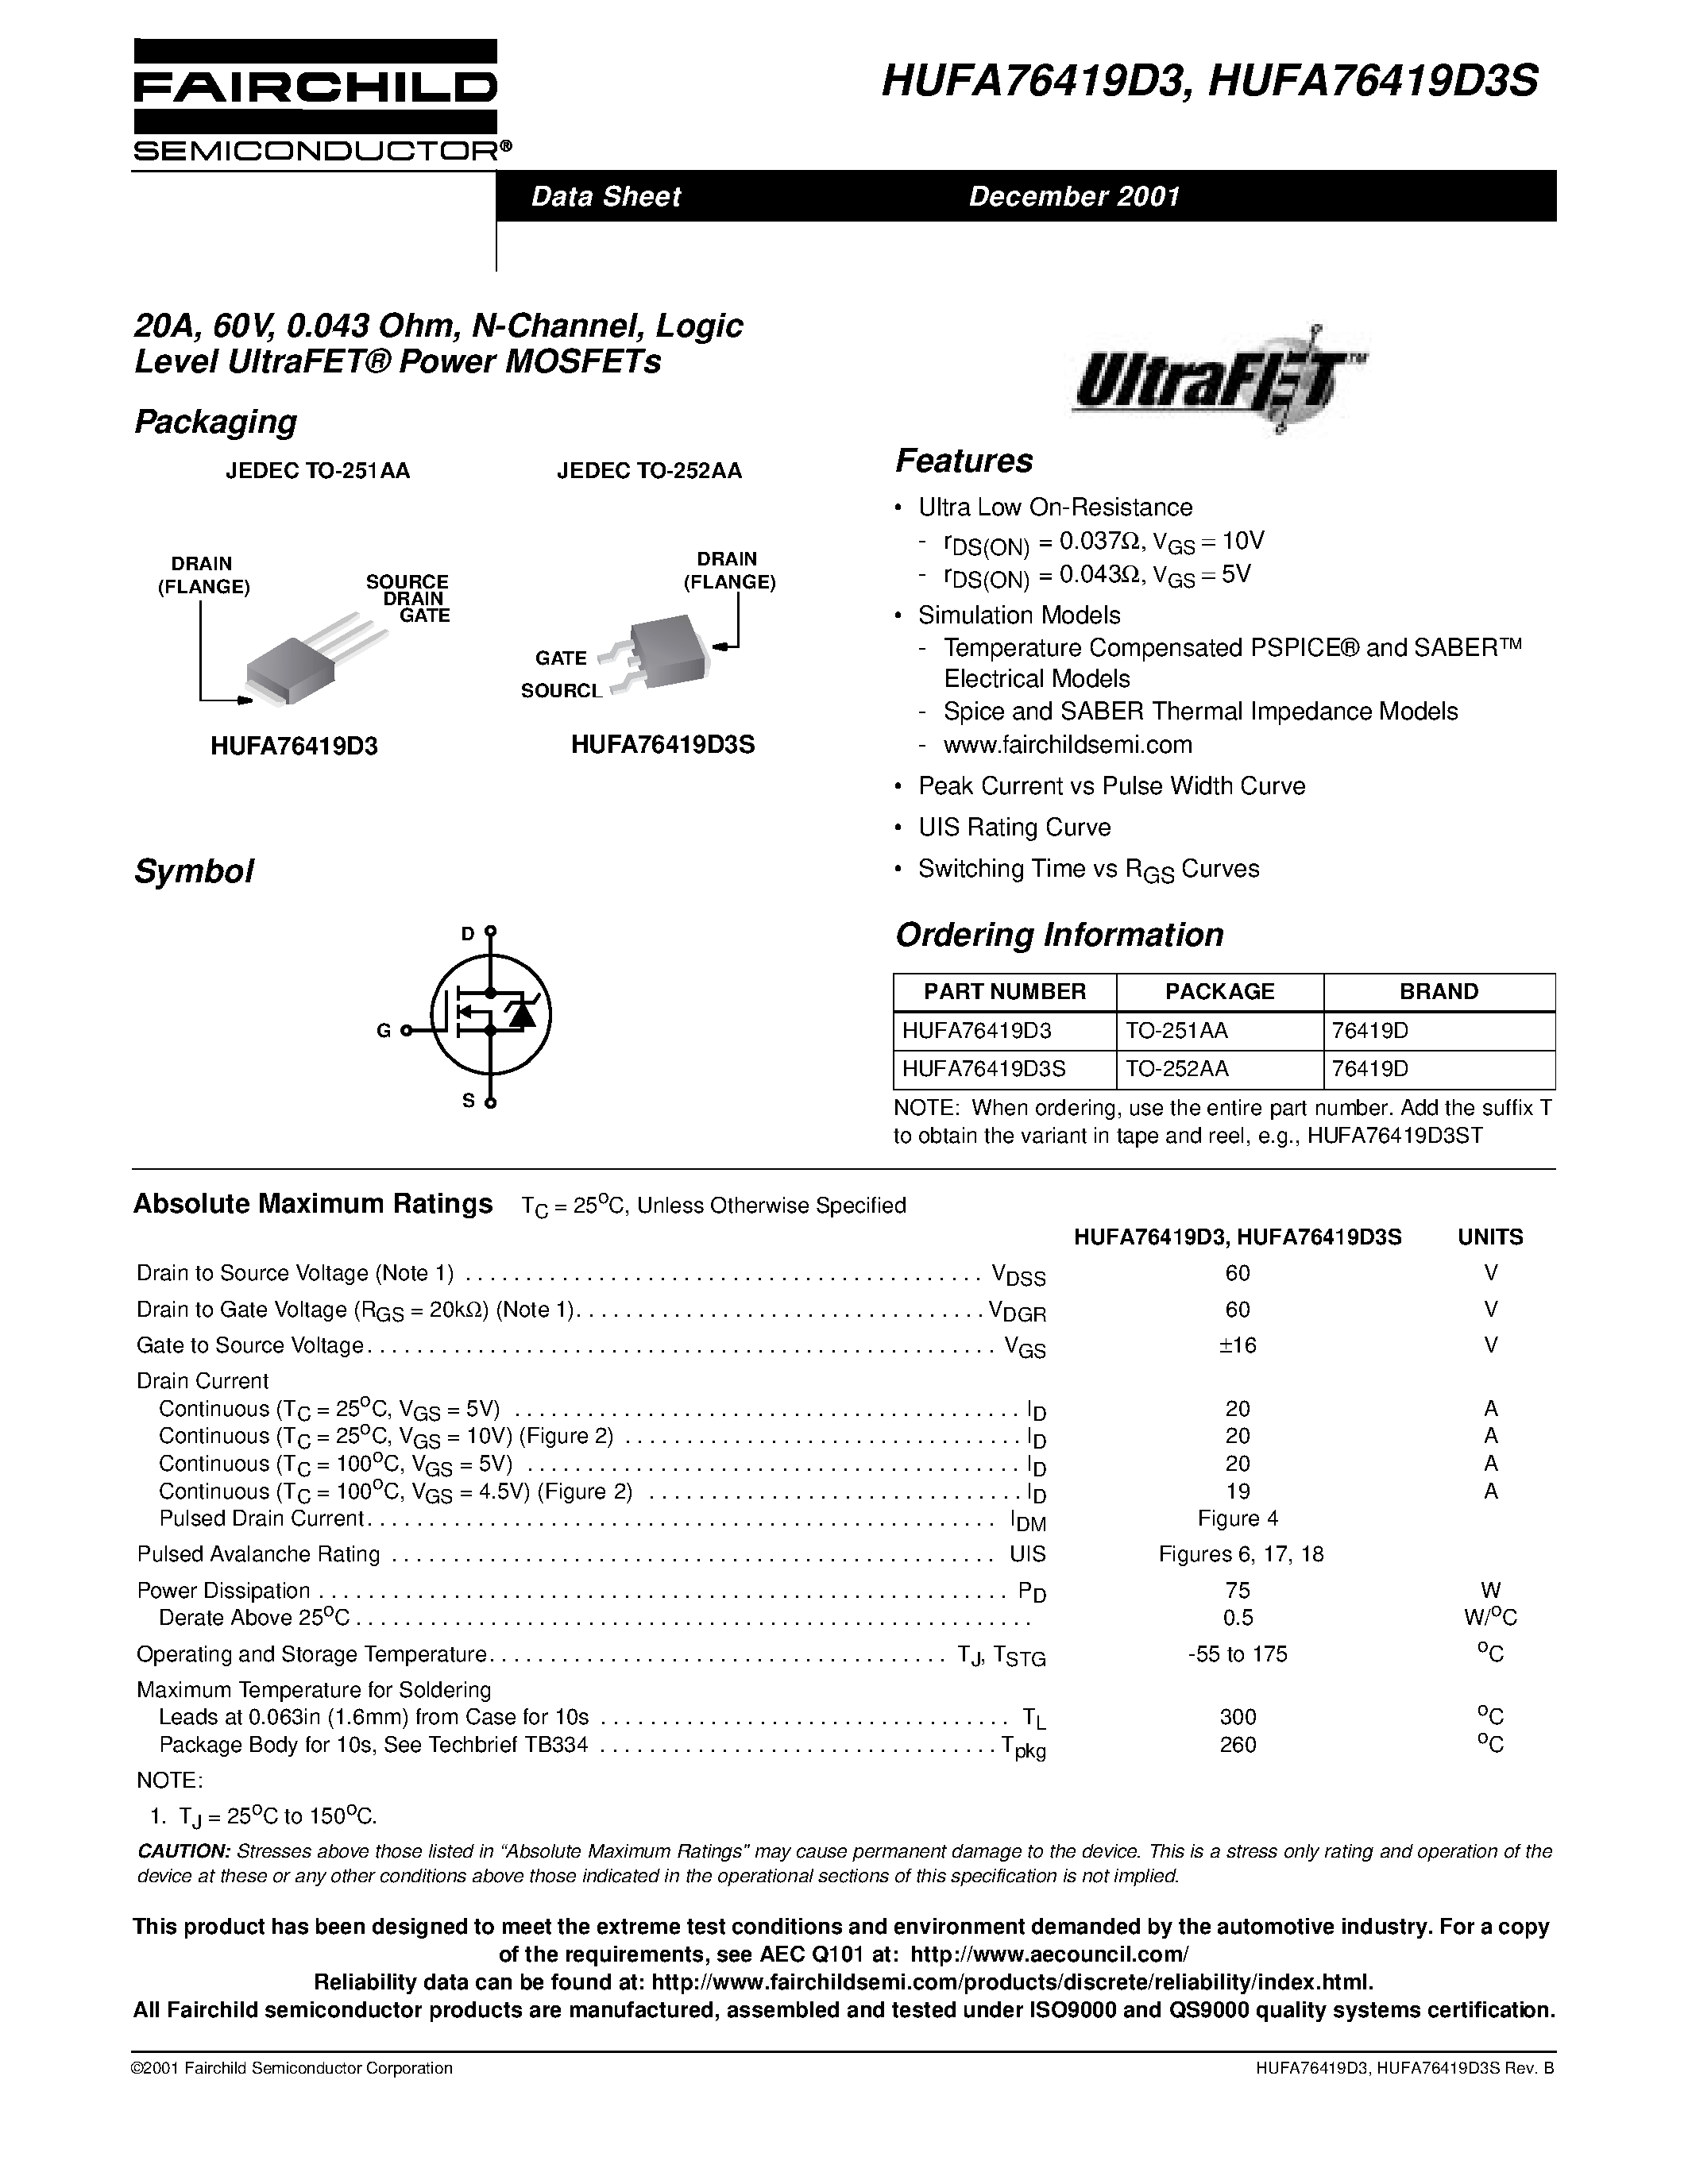 Datasheet HUFA76419D3 - 20A/ 60V/ 0.043 Ohm/ N-Channel/ Logic Level UltraFET Power MOSFETs page 1